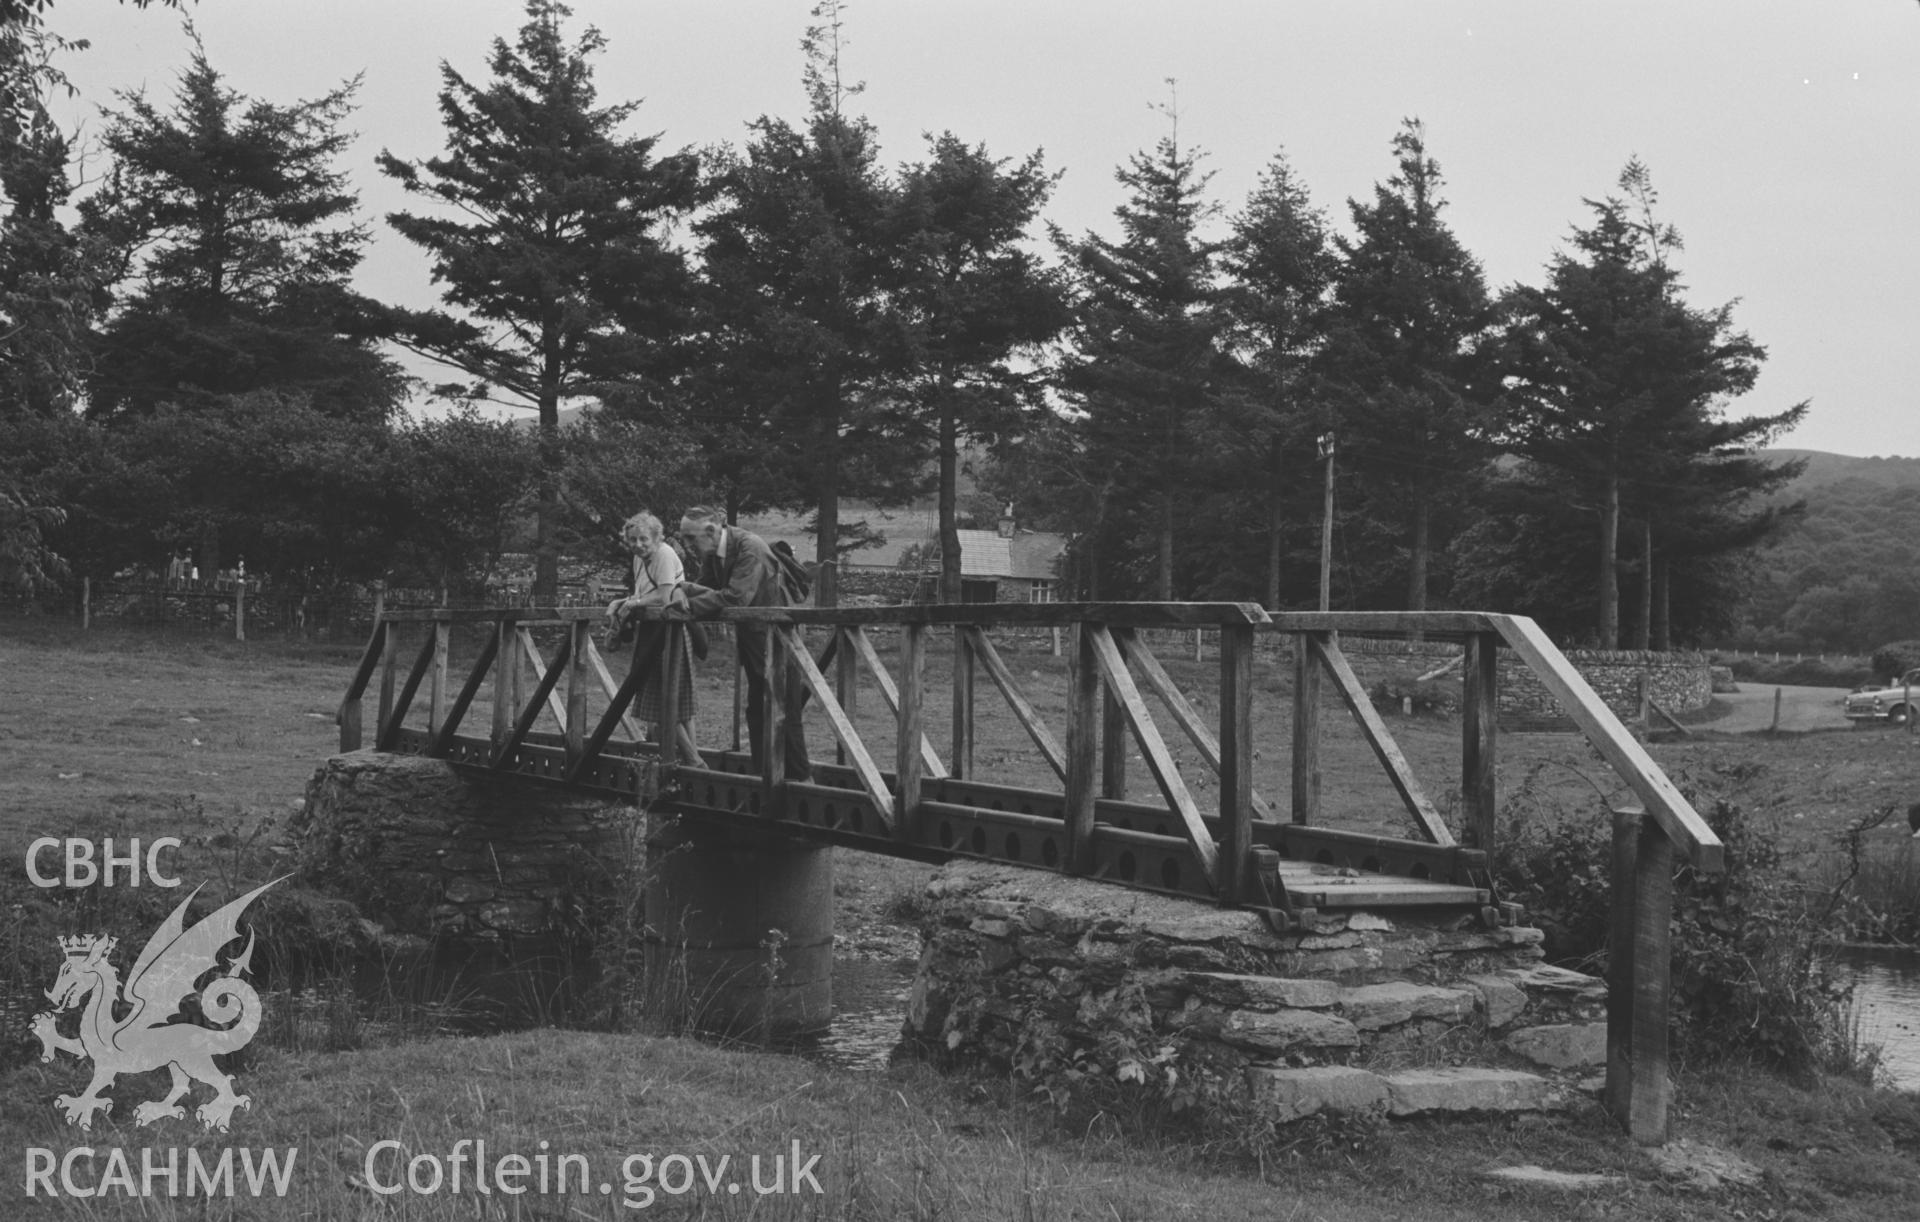 Digital copy of a black and white negative showing footbridge over the Teifi at Strata Florida. Photographed by Arthur O. Chater on 25th August 1967, looking south from Grid Reference SN 746 658.